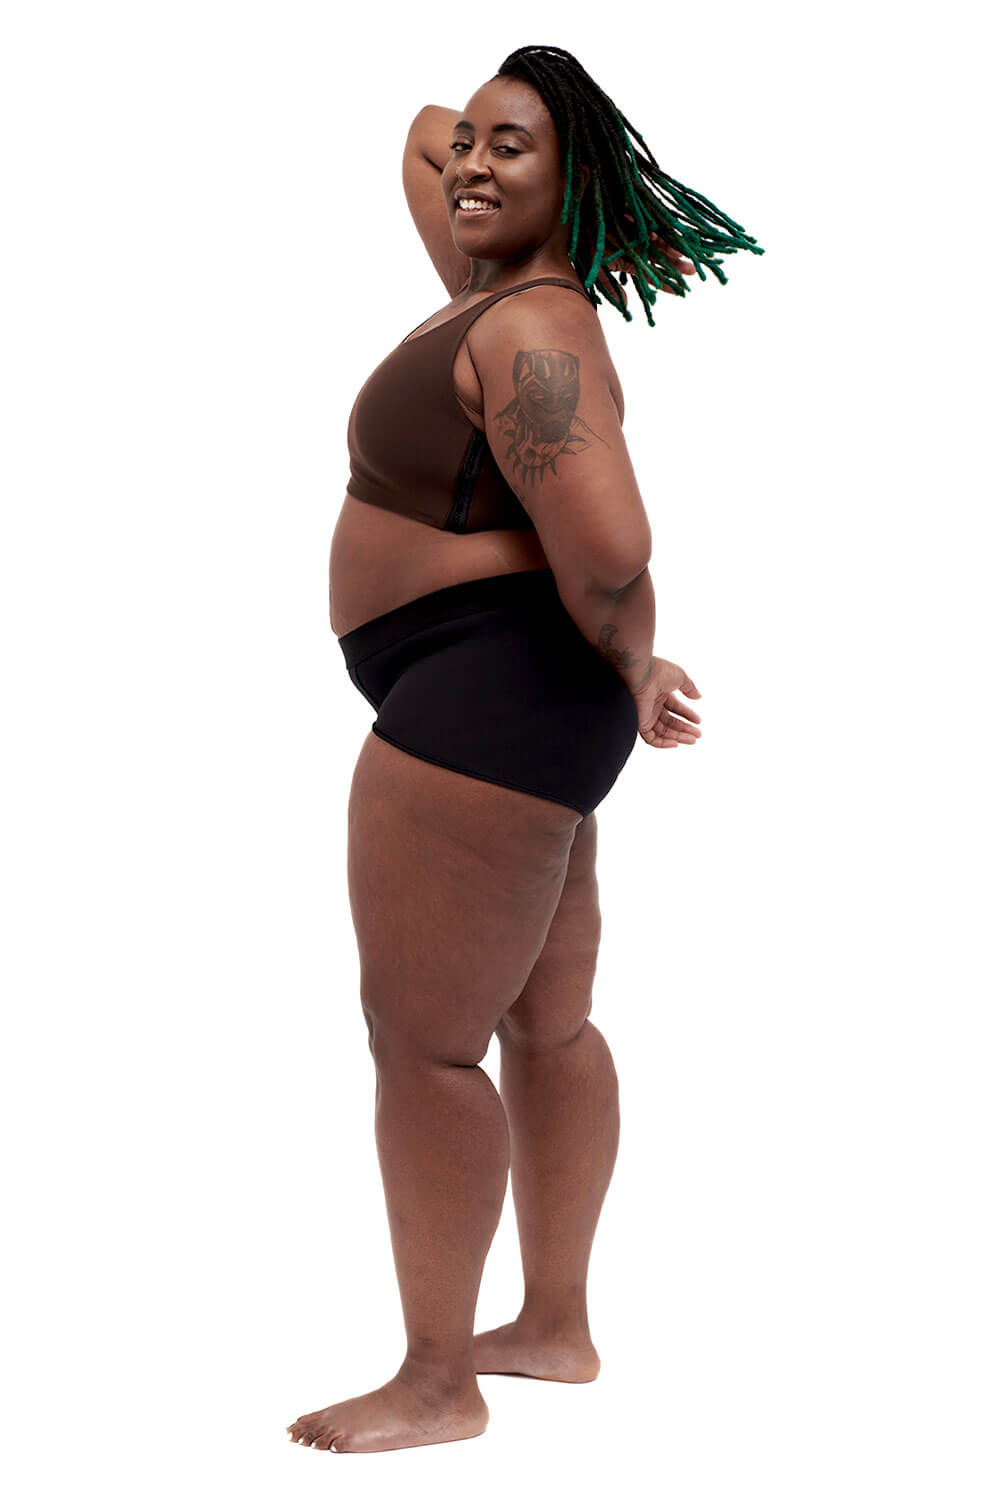 Plus-sized person wearing a brown racerback side-open chest binder made from lycra, photographed from the side.